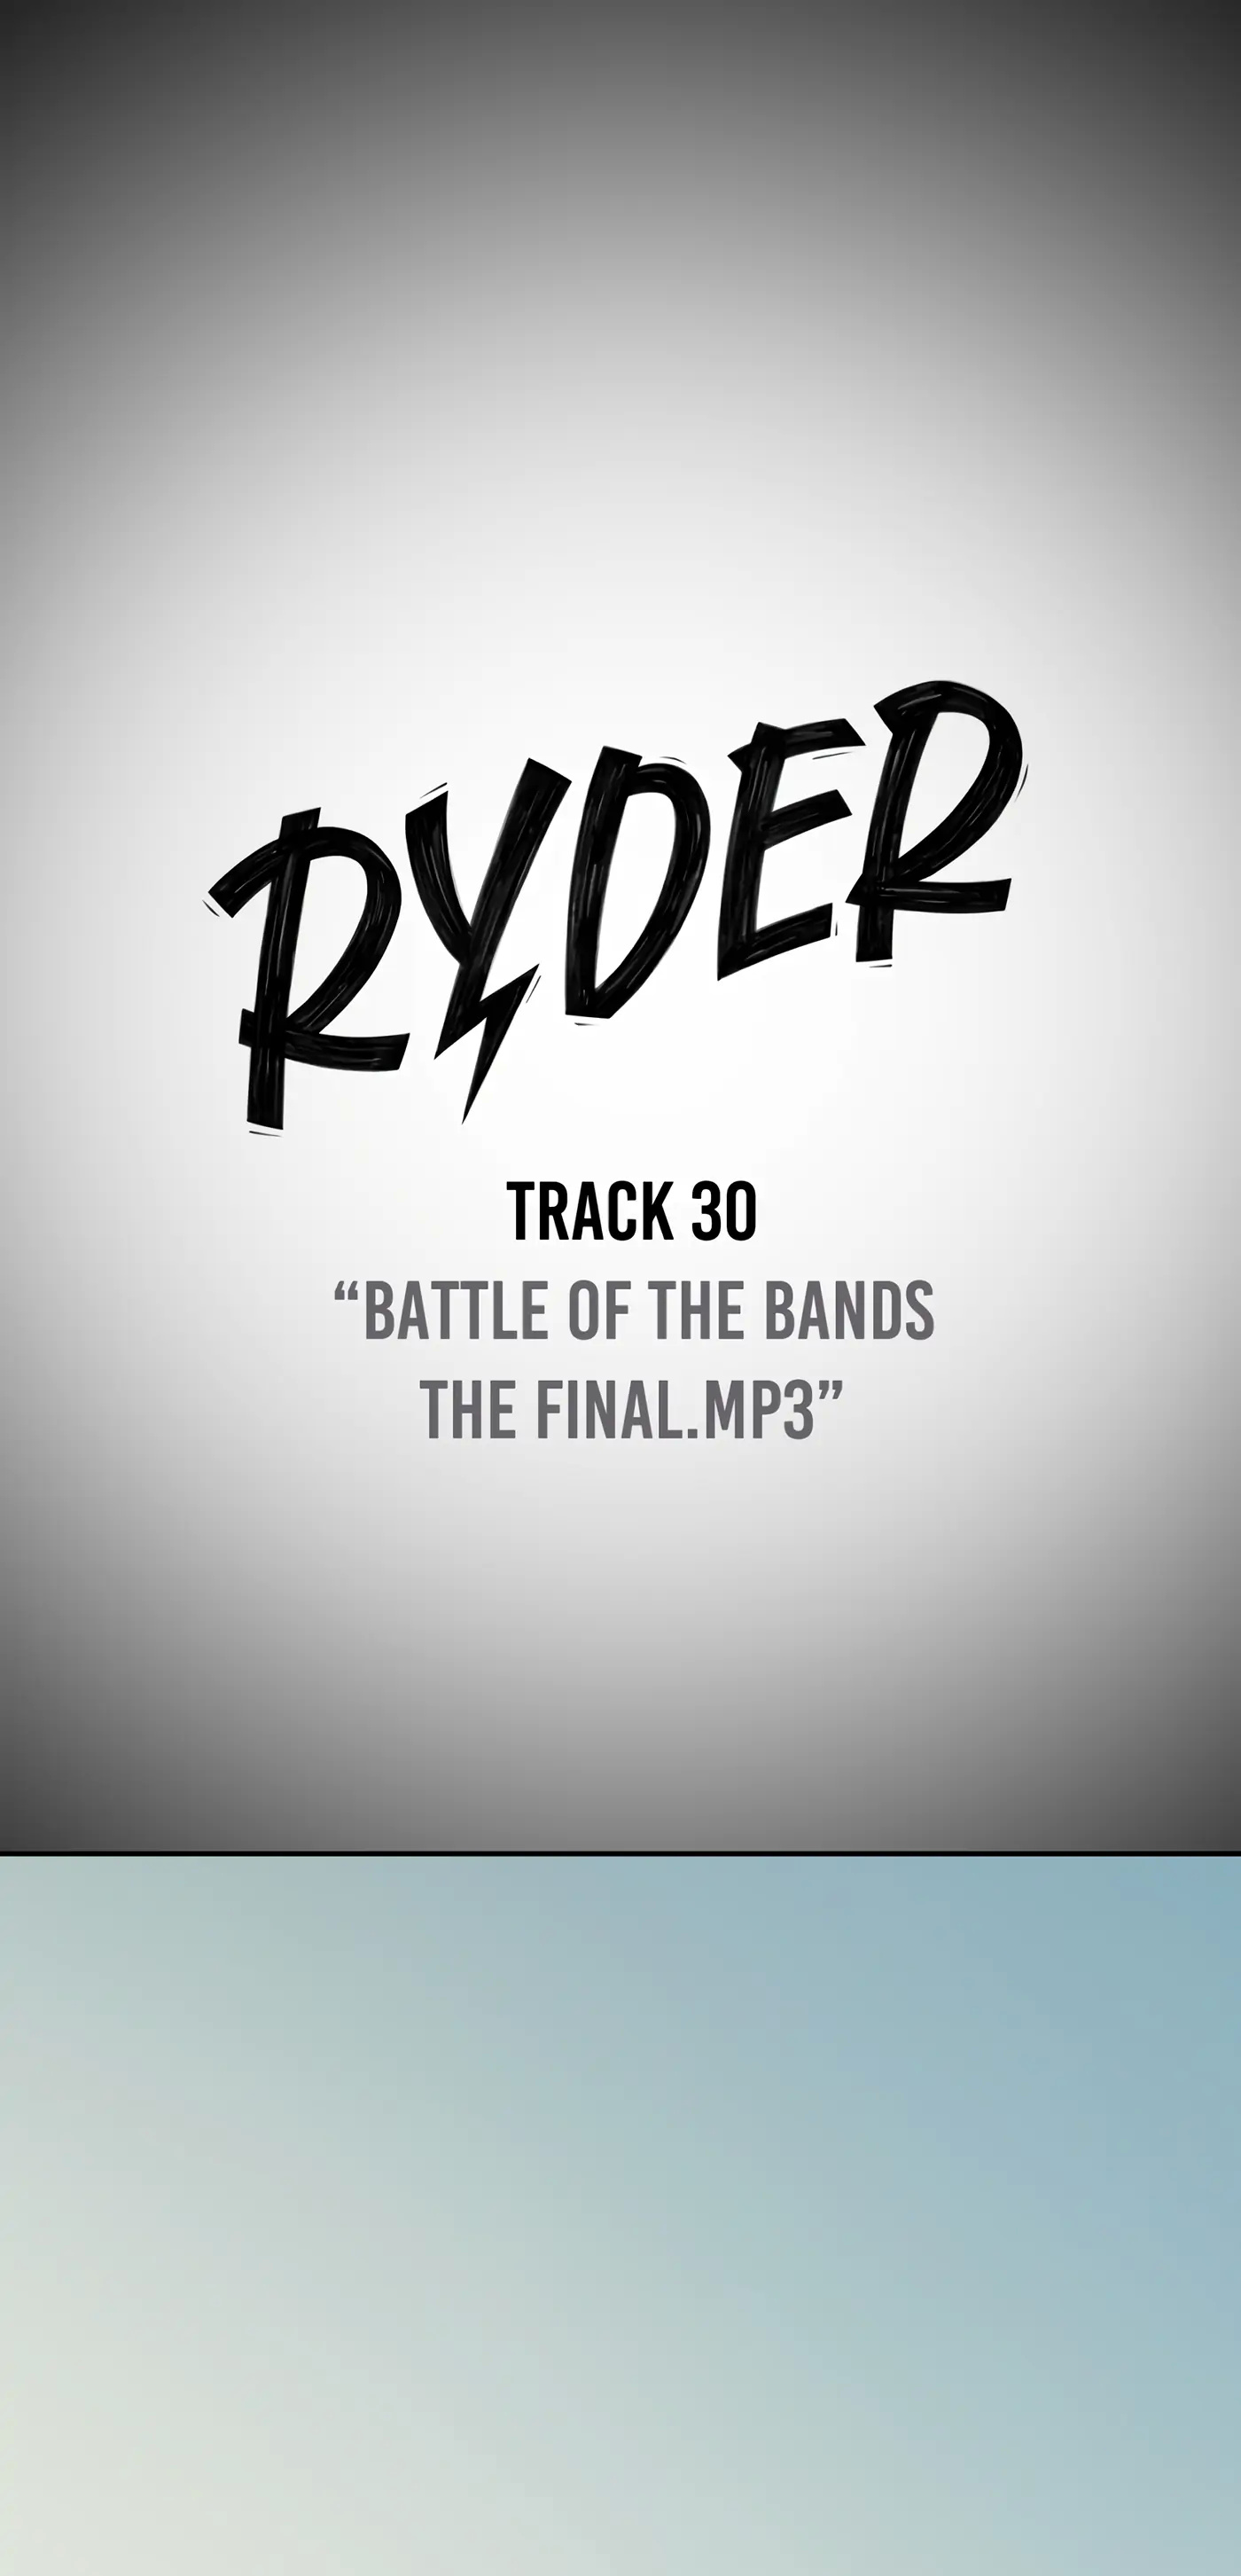 Ryder - Page 1